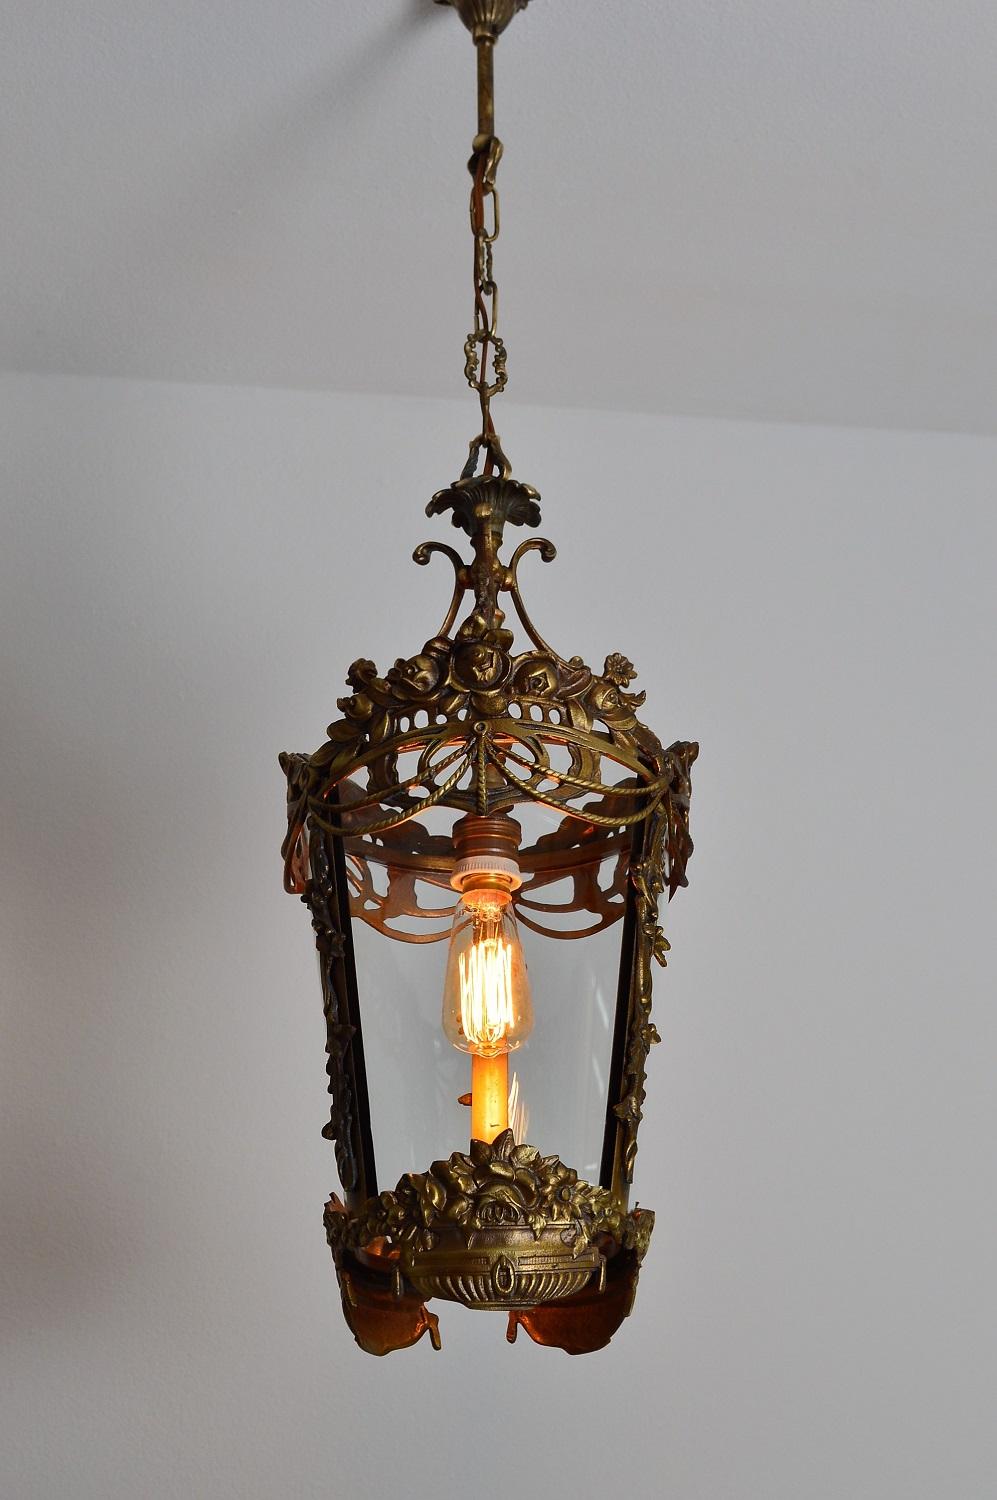 Italian Mid-Century Bronze Lantern with Flowers and Garlands, 1950s For Sale 5